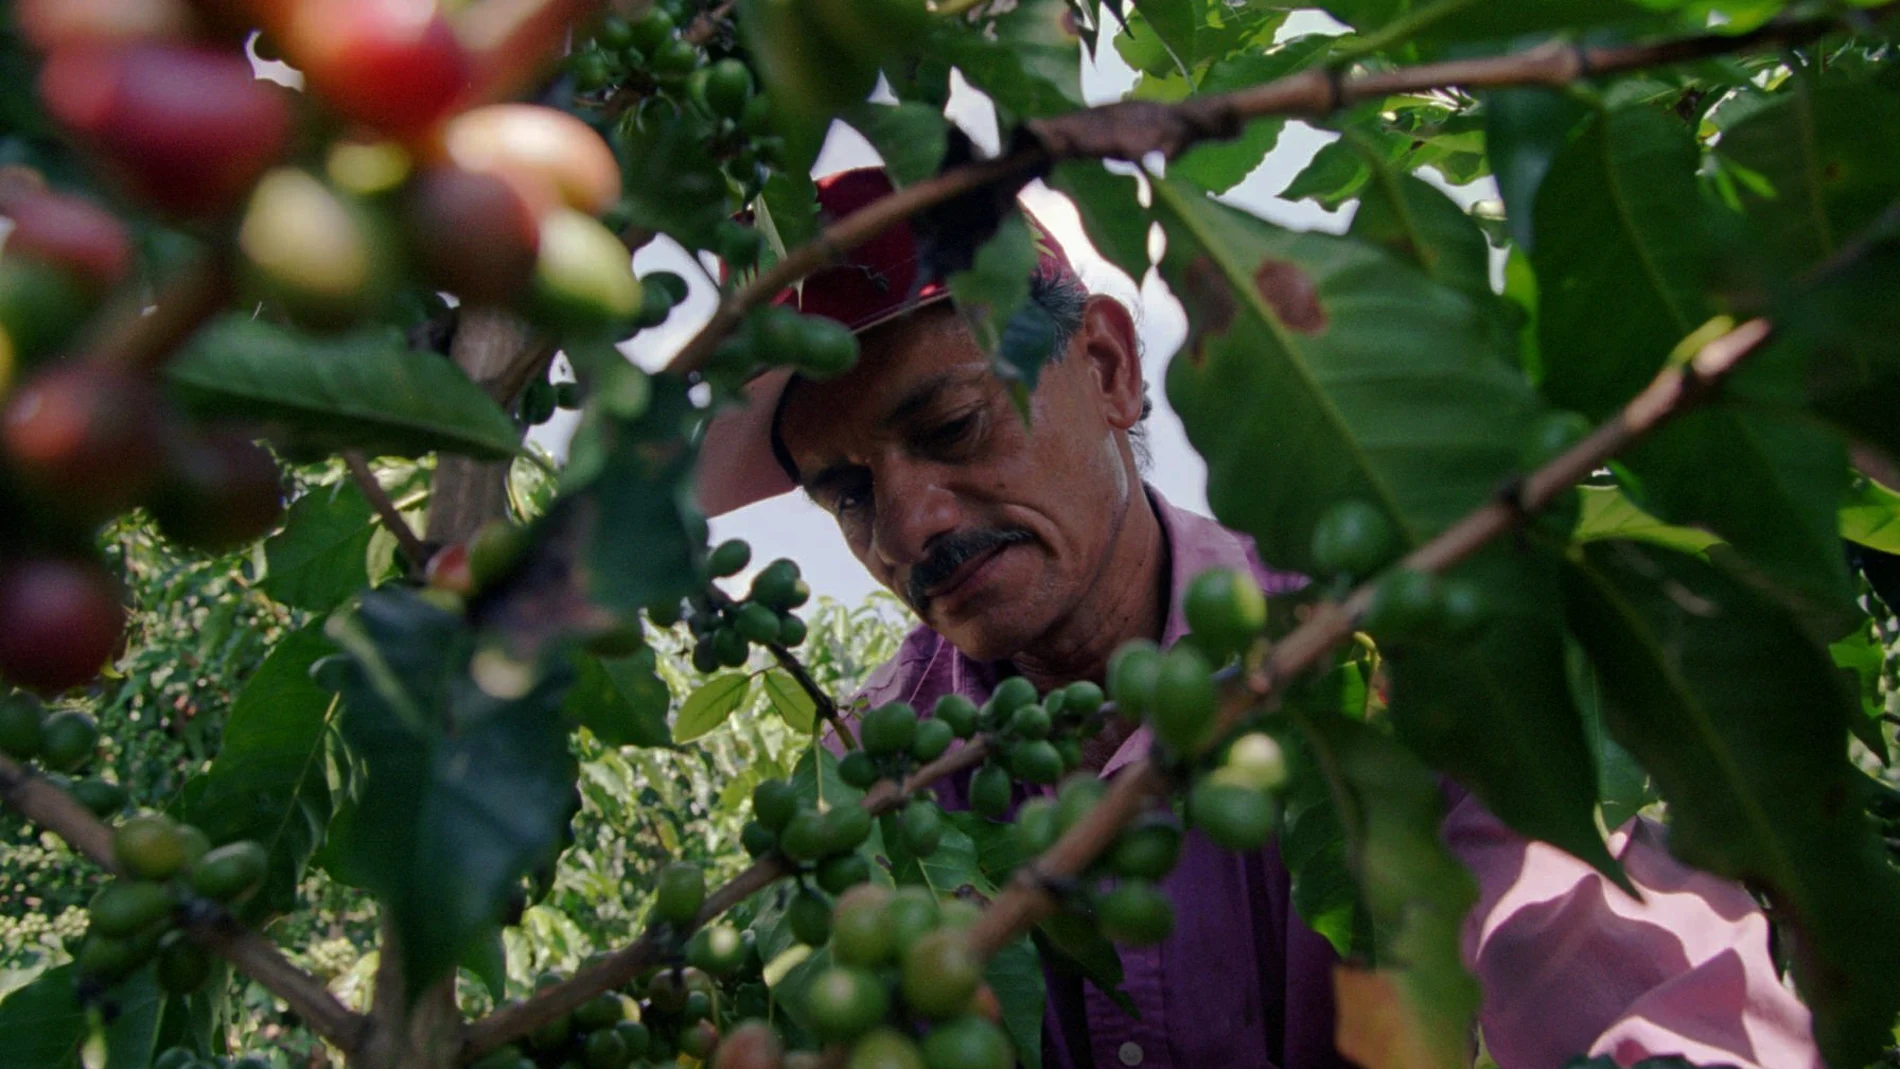 AGRONOMIST INSPECTS COFFE TREE